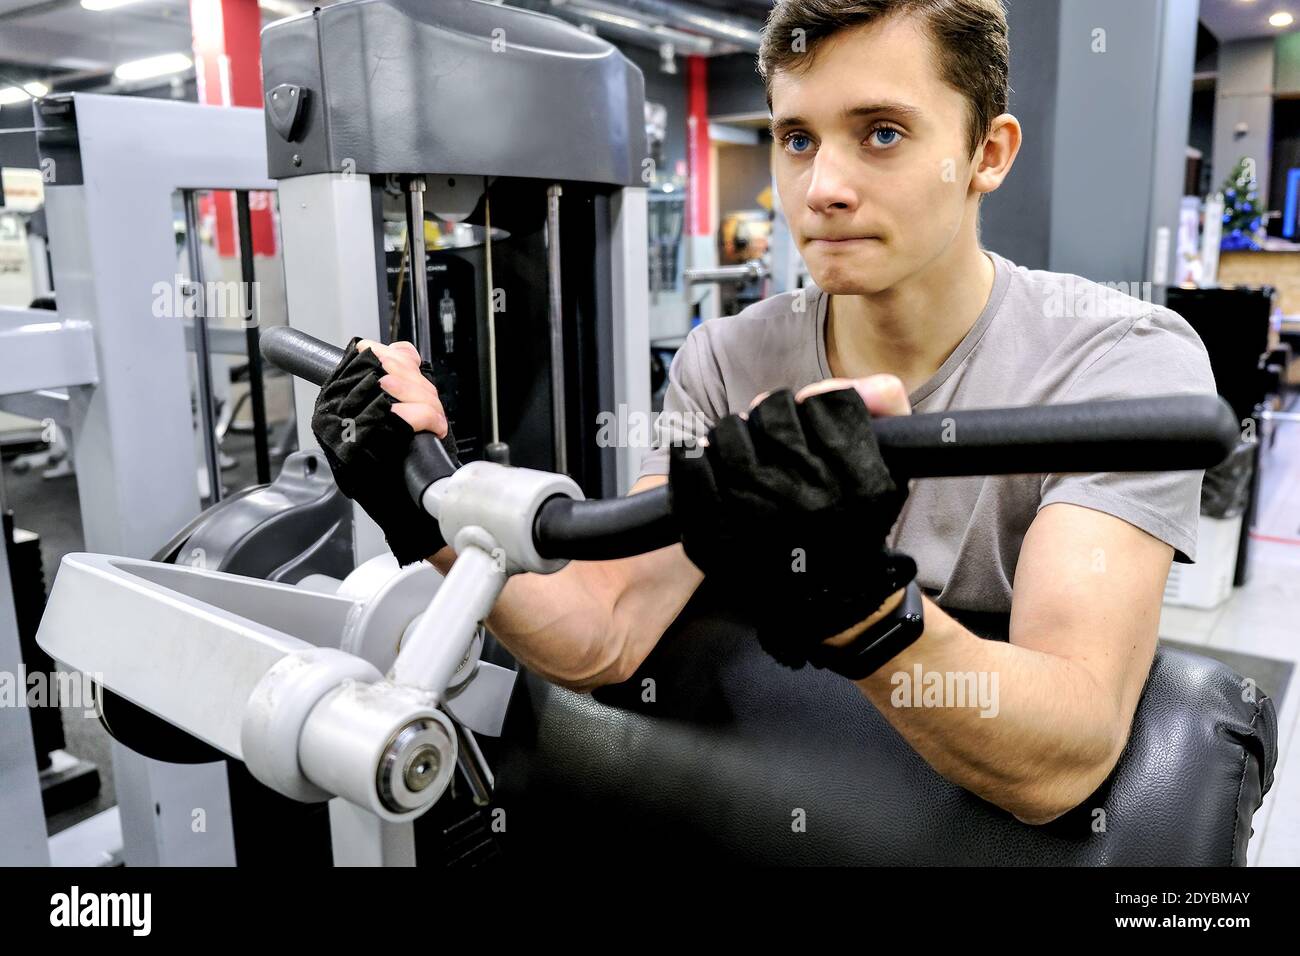 A young man exercises on the simulator in the gym. Trains the muscle strength. The concept of a healthy lifestyle Stock Photo